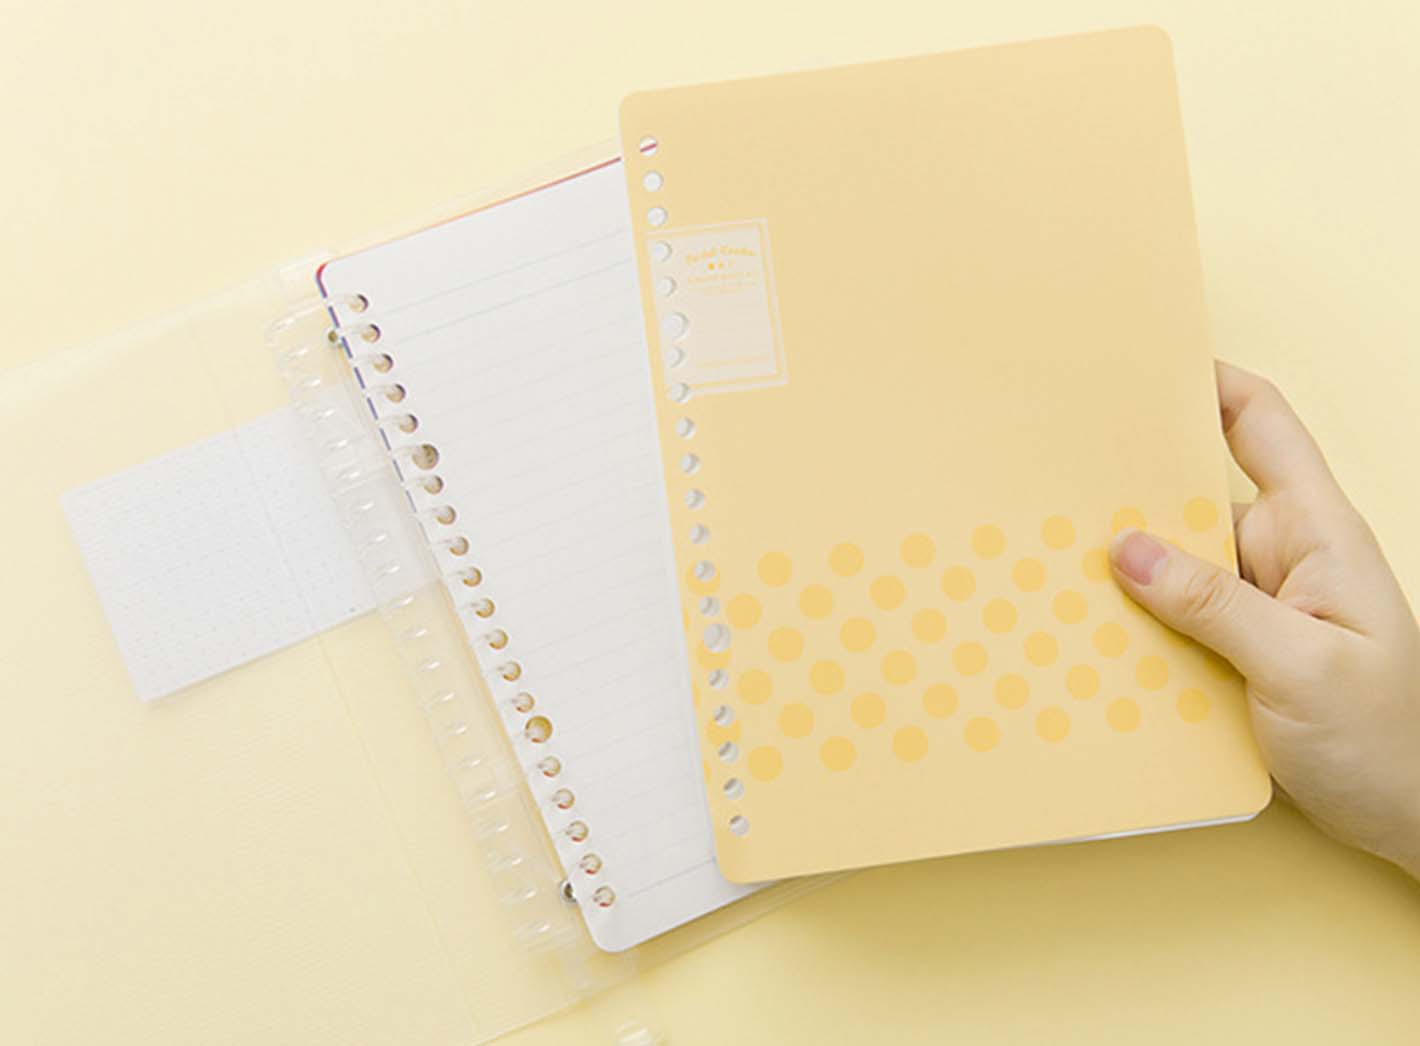 6 Unique Japanese Binders You Didn't Know You Needed 📒 